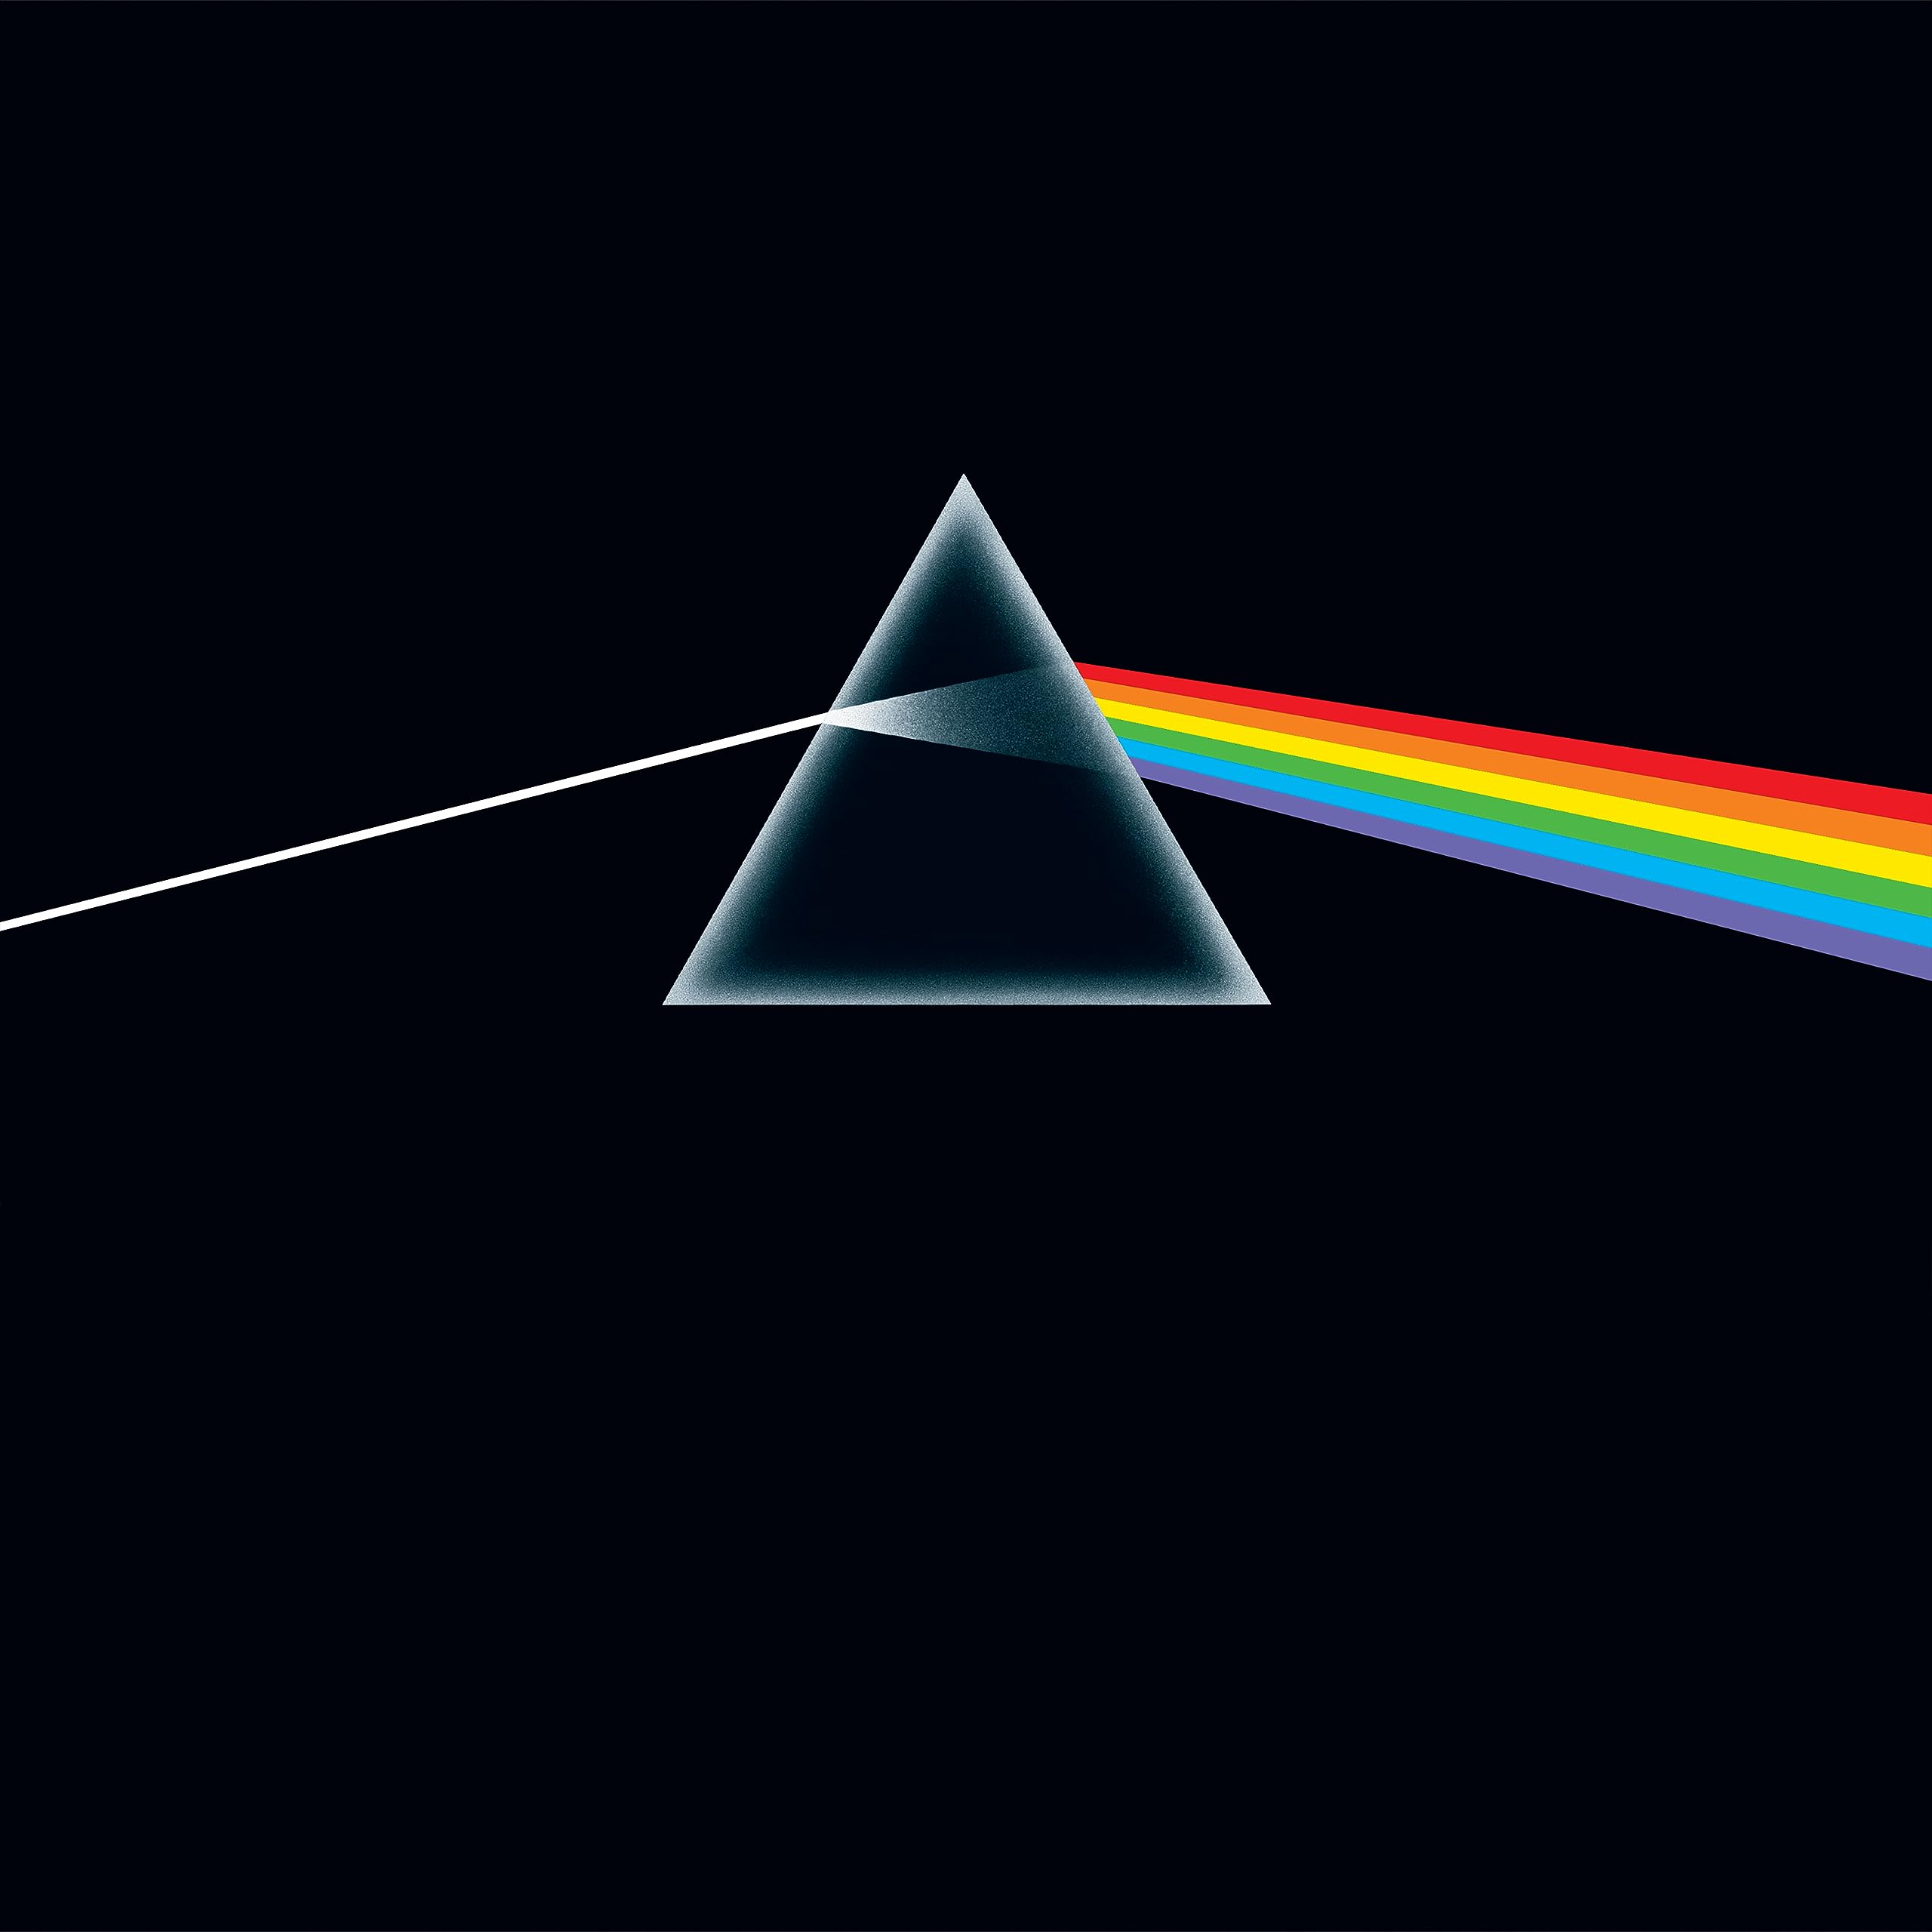 Pink Floyd: The Dark Side of the Moon 50th Anniversary (Remastered Vinyl) $21.90 ~ Amazon